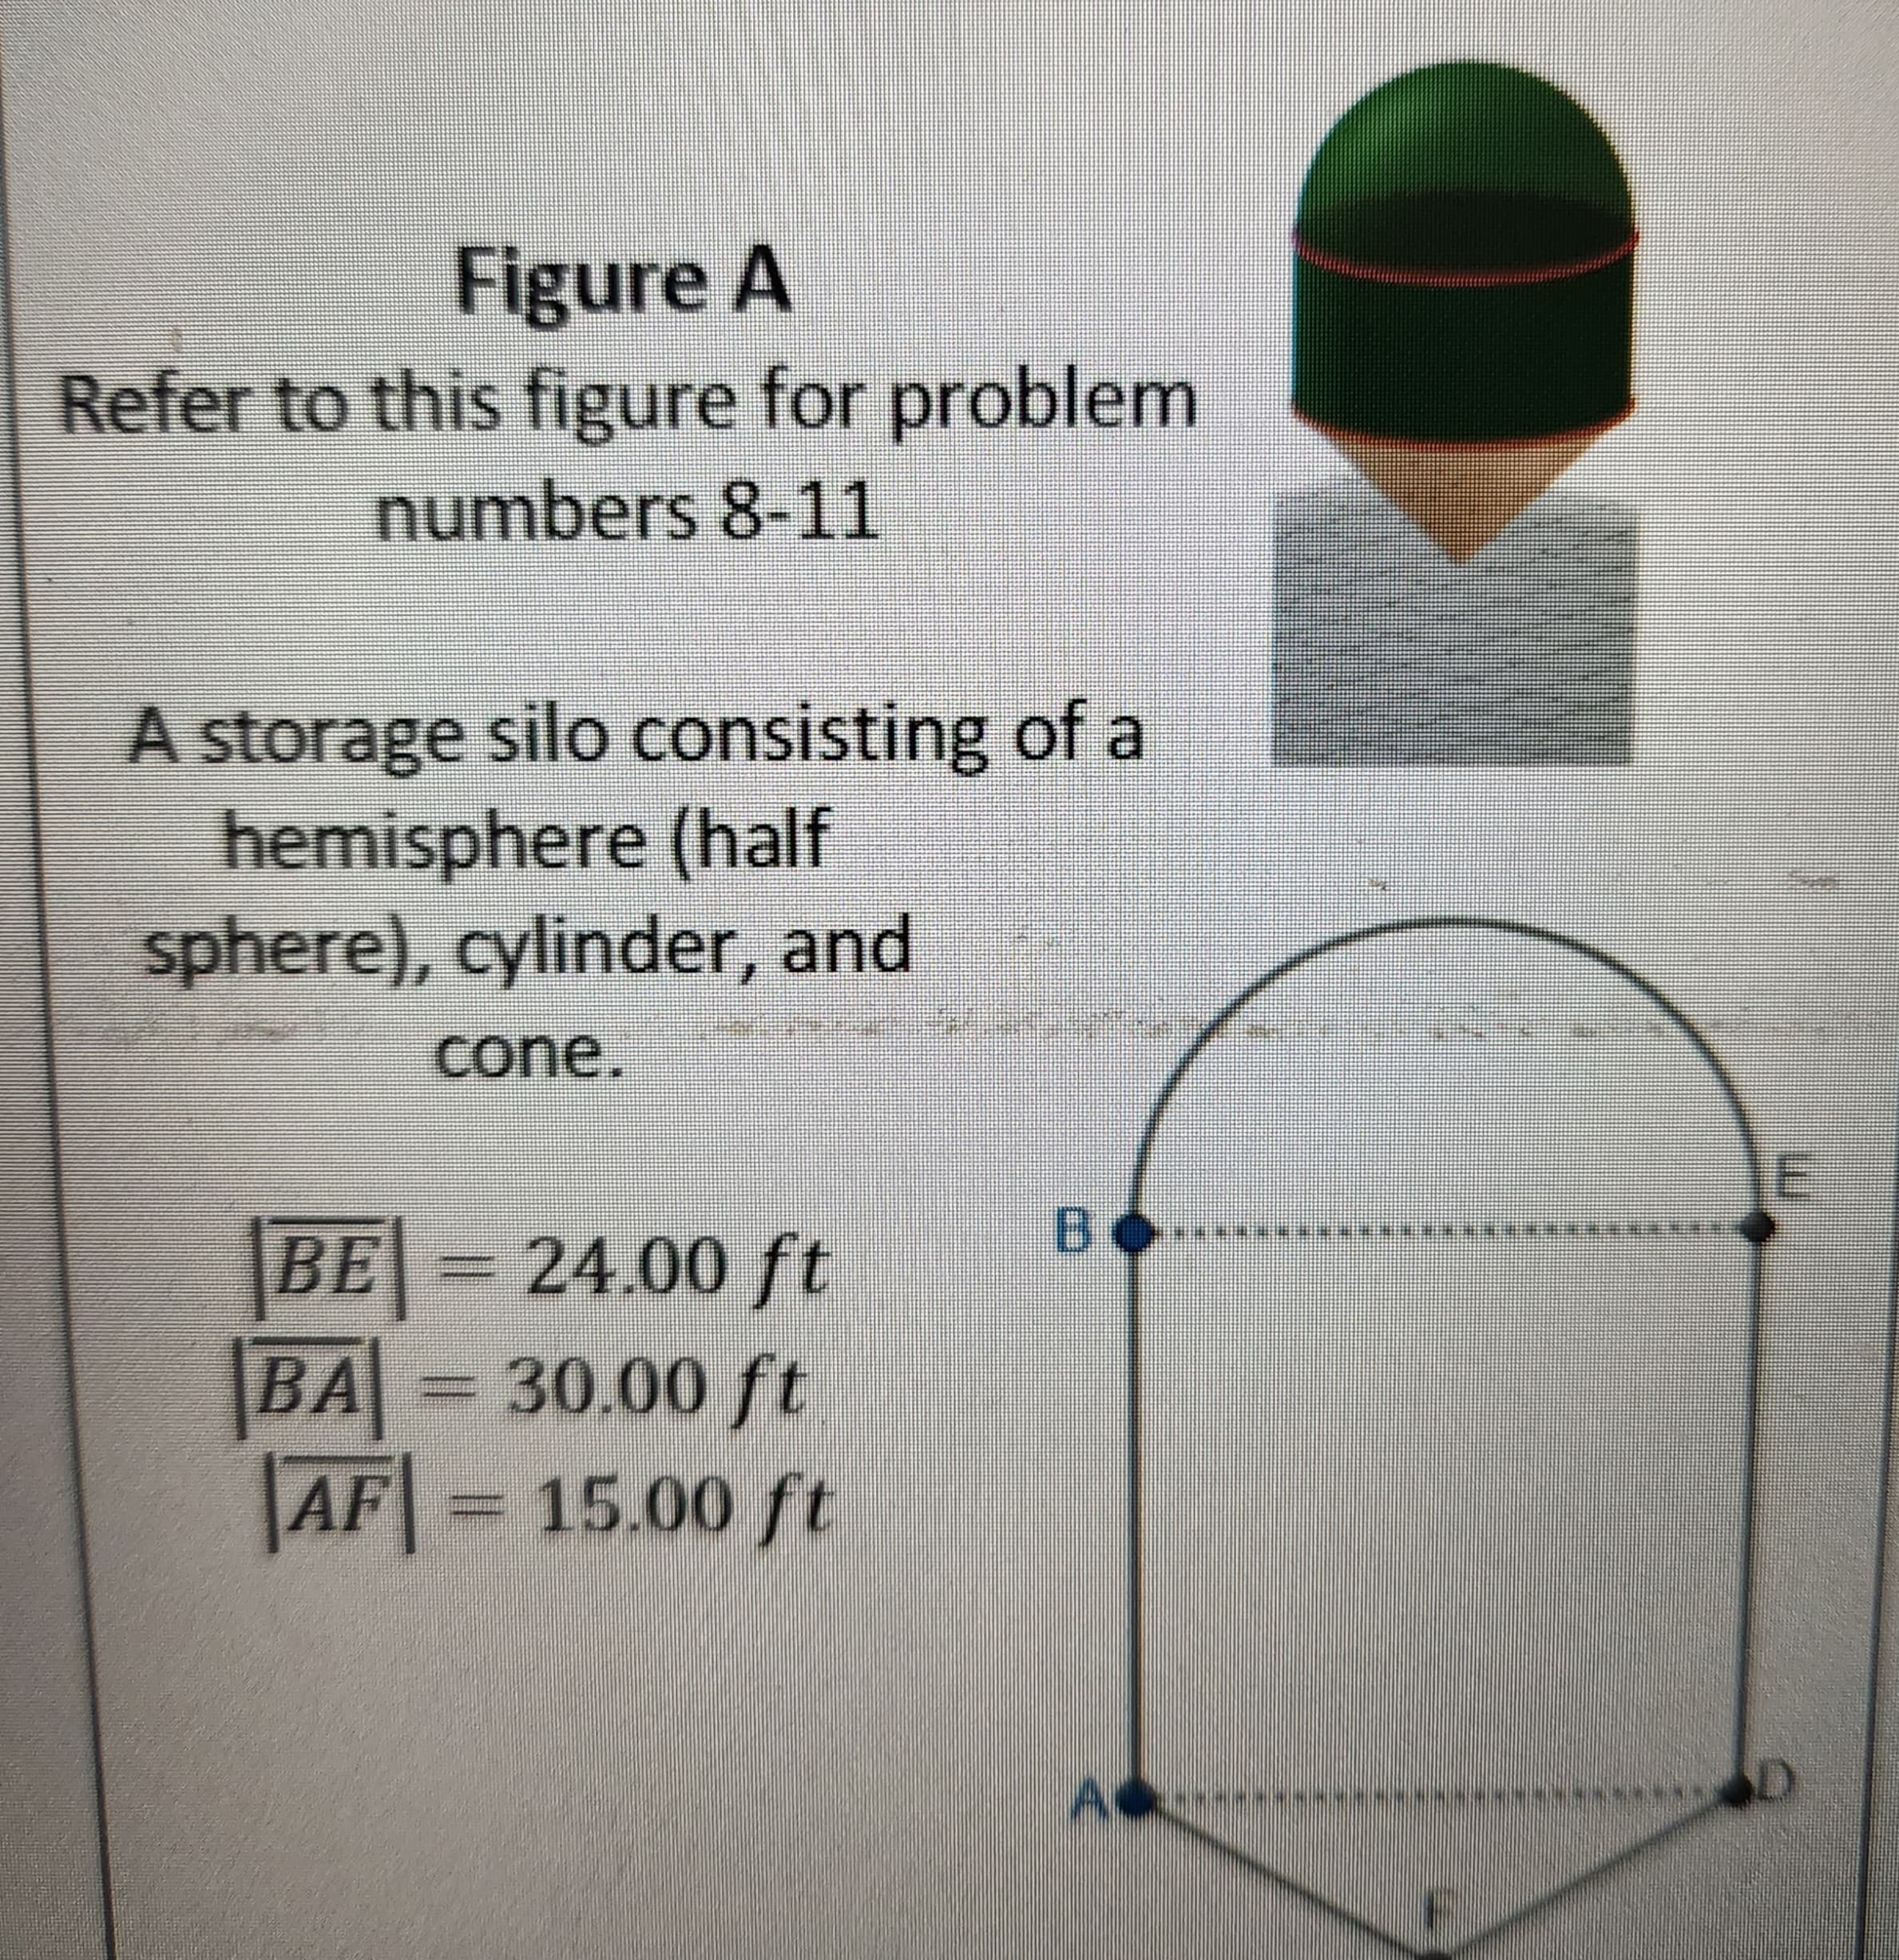 Figure A
Refer to this figure for problem
numbers 8-11
A storage silo consisting of a
hemisphere (half
sphere), cylinder, and
cone.
|BE| = 24.00 ft
|BA| = 30.00 ft
AF = 15.00 ft
во..
E